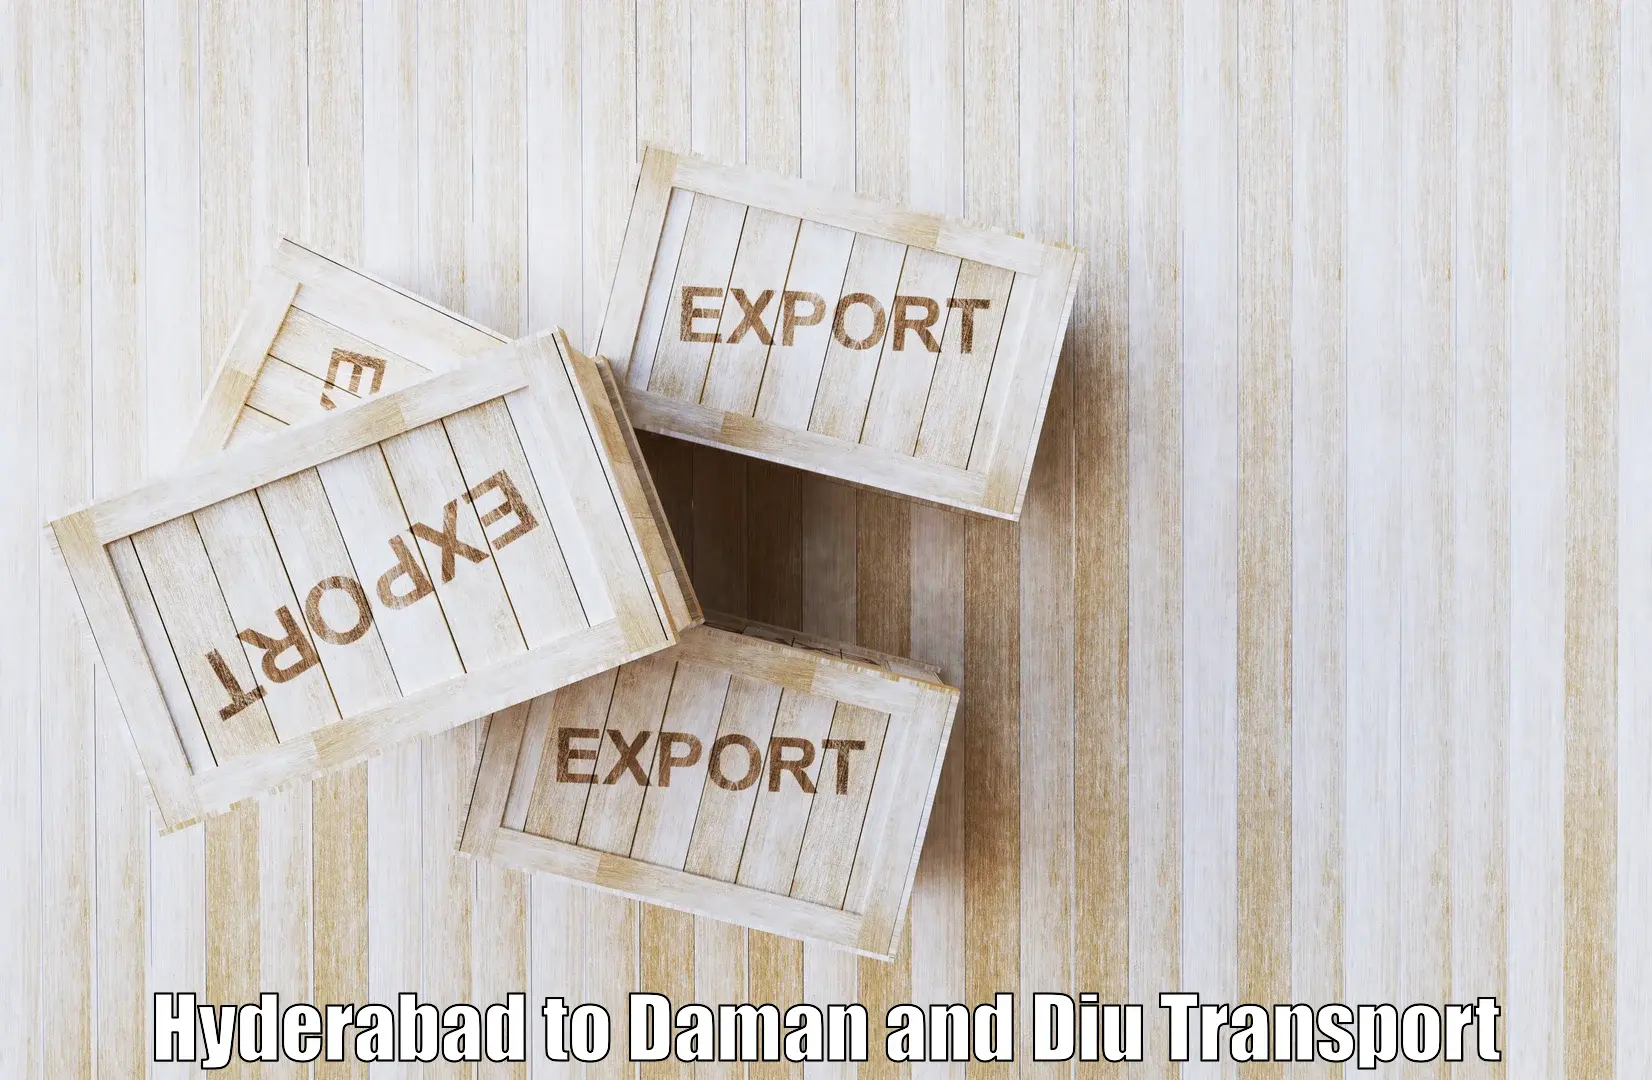 Road transport online services Hyderabad to Daman and Diu